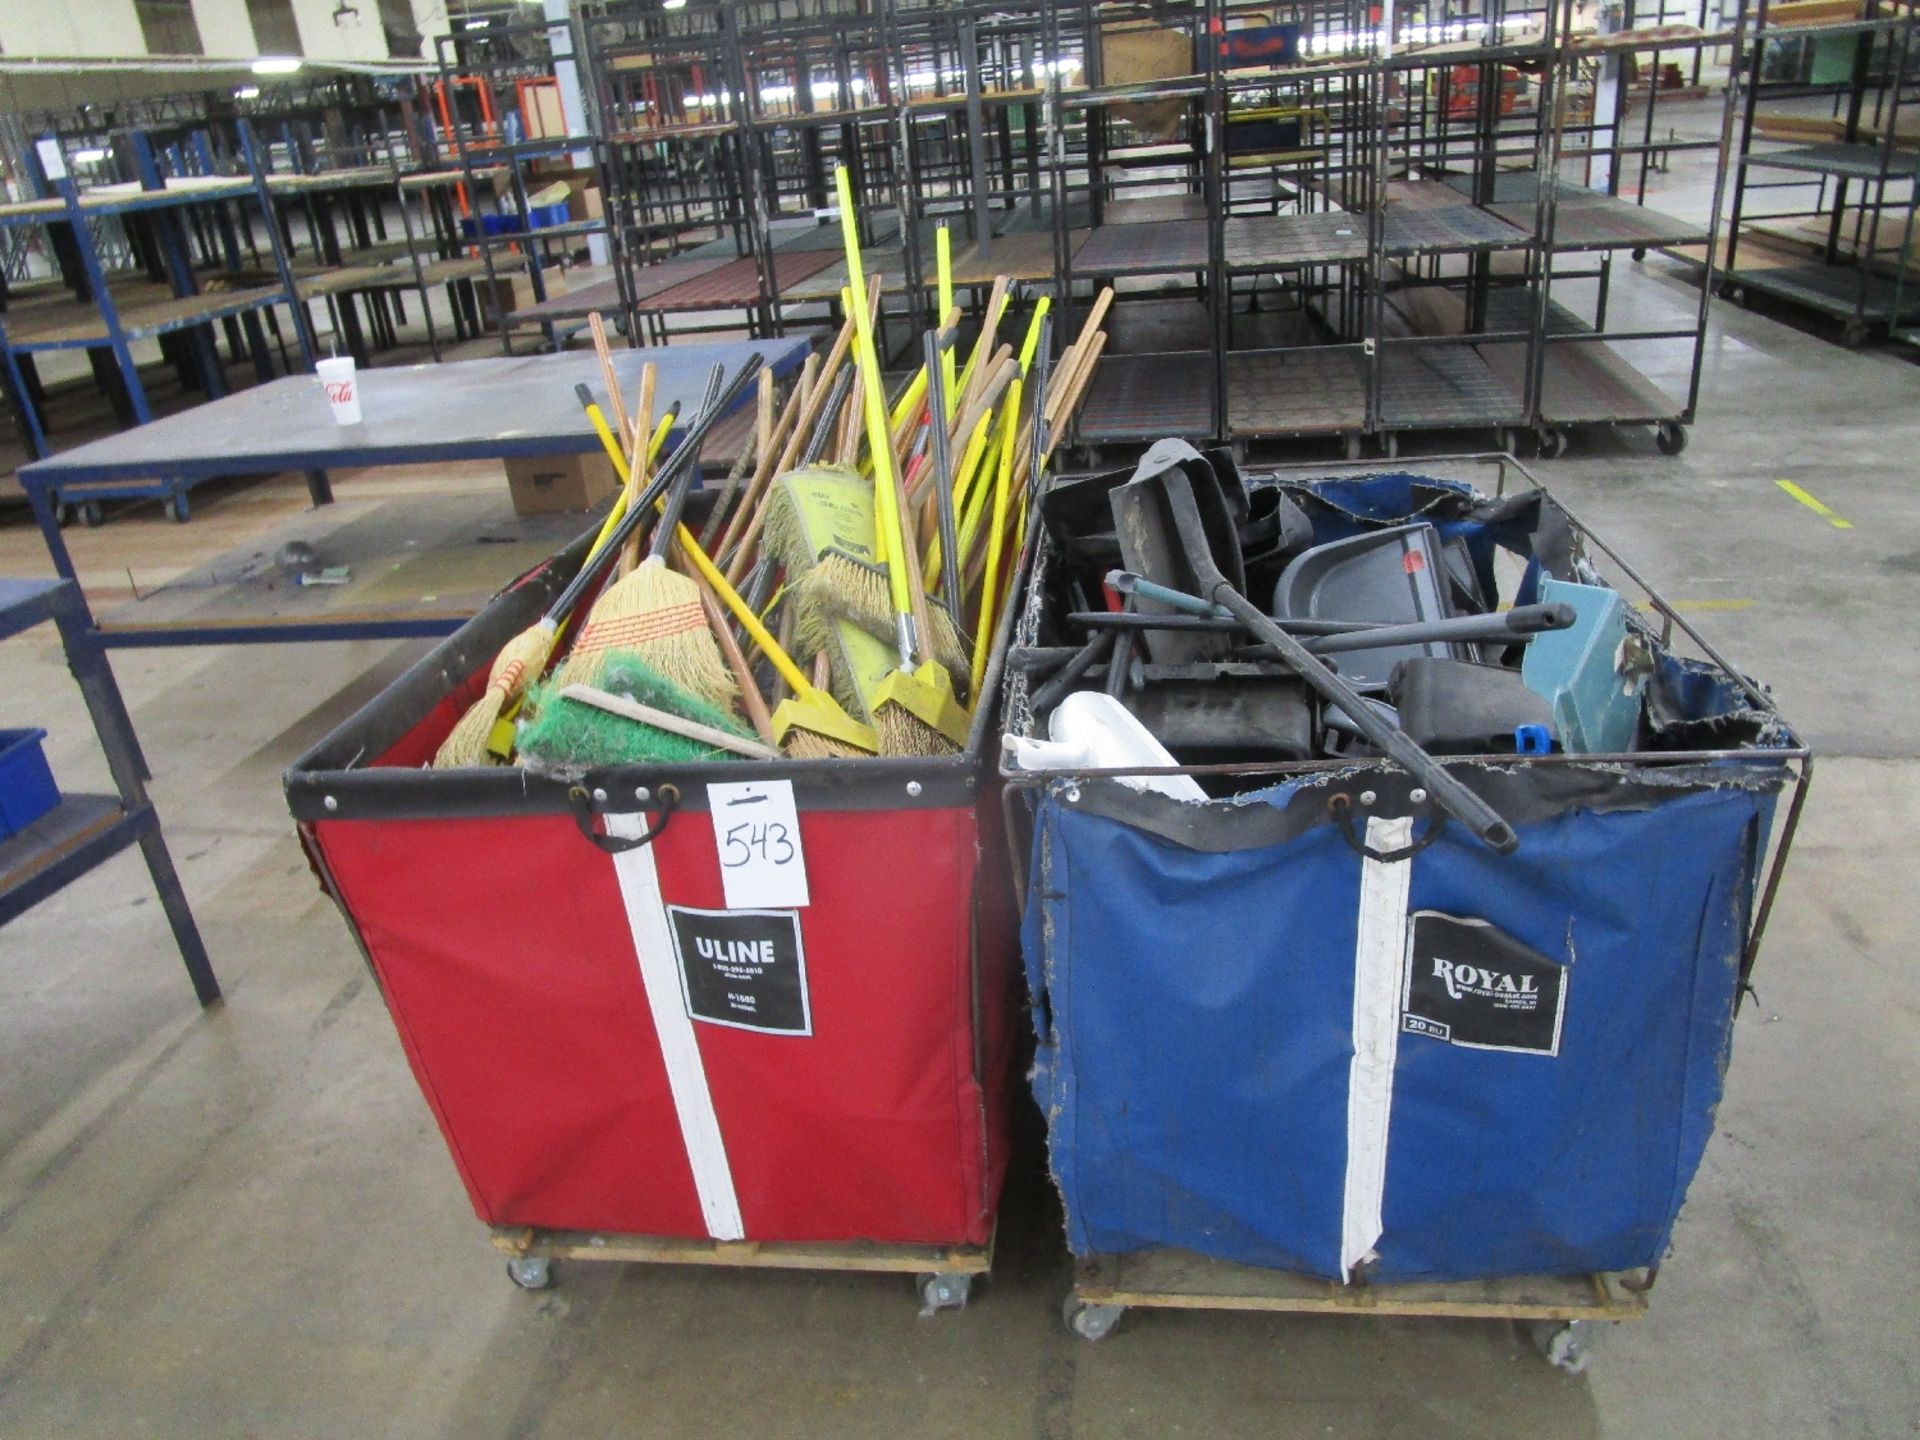 Lot of Cleaning Supplies in Uline Basket Trucks - Image 2 of 2